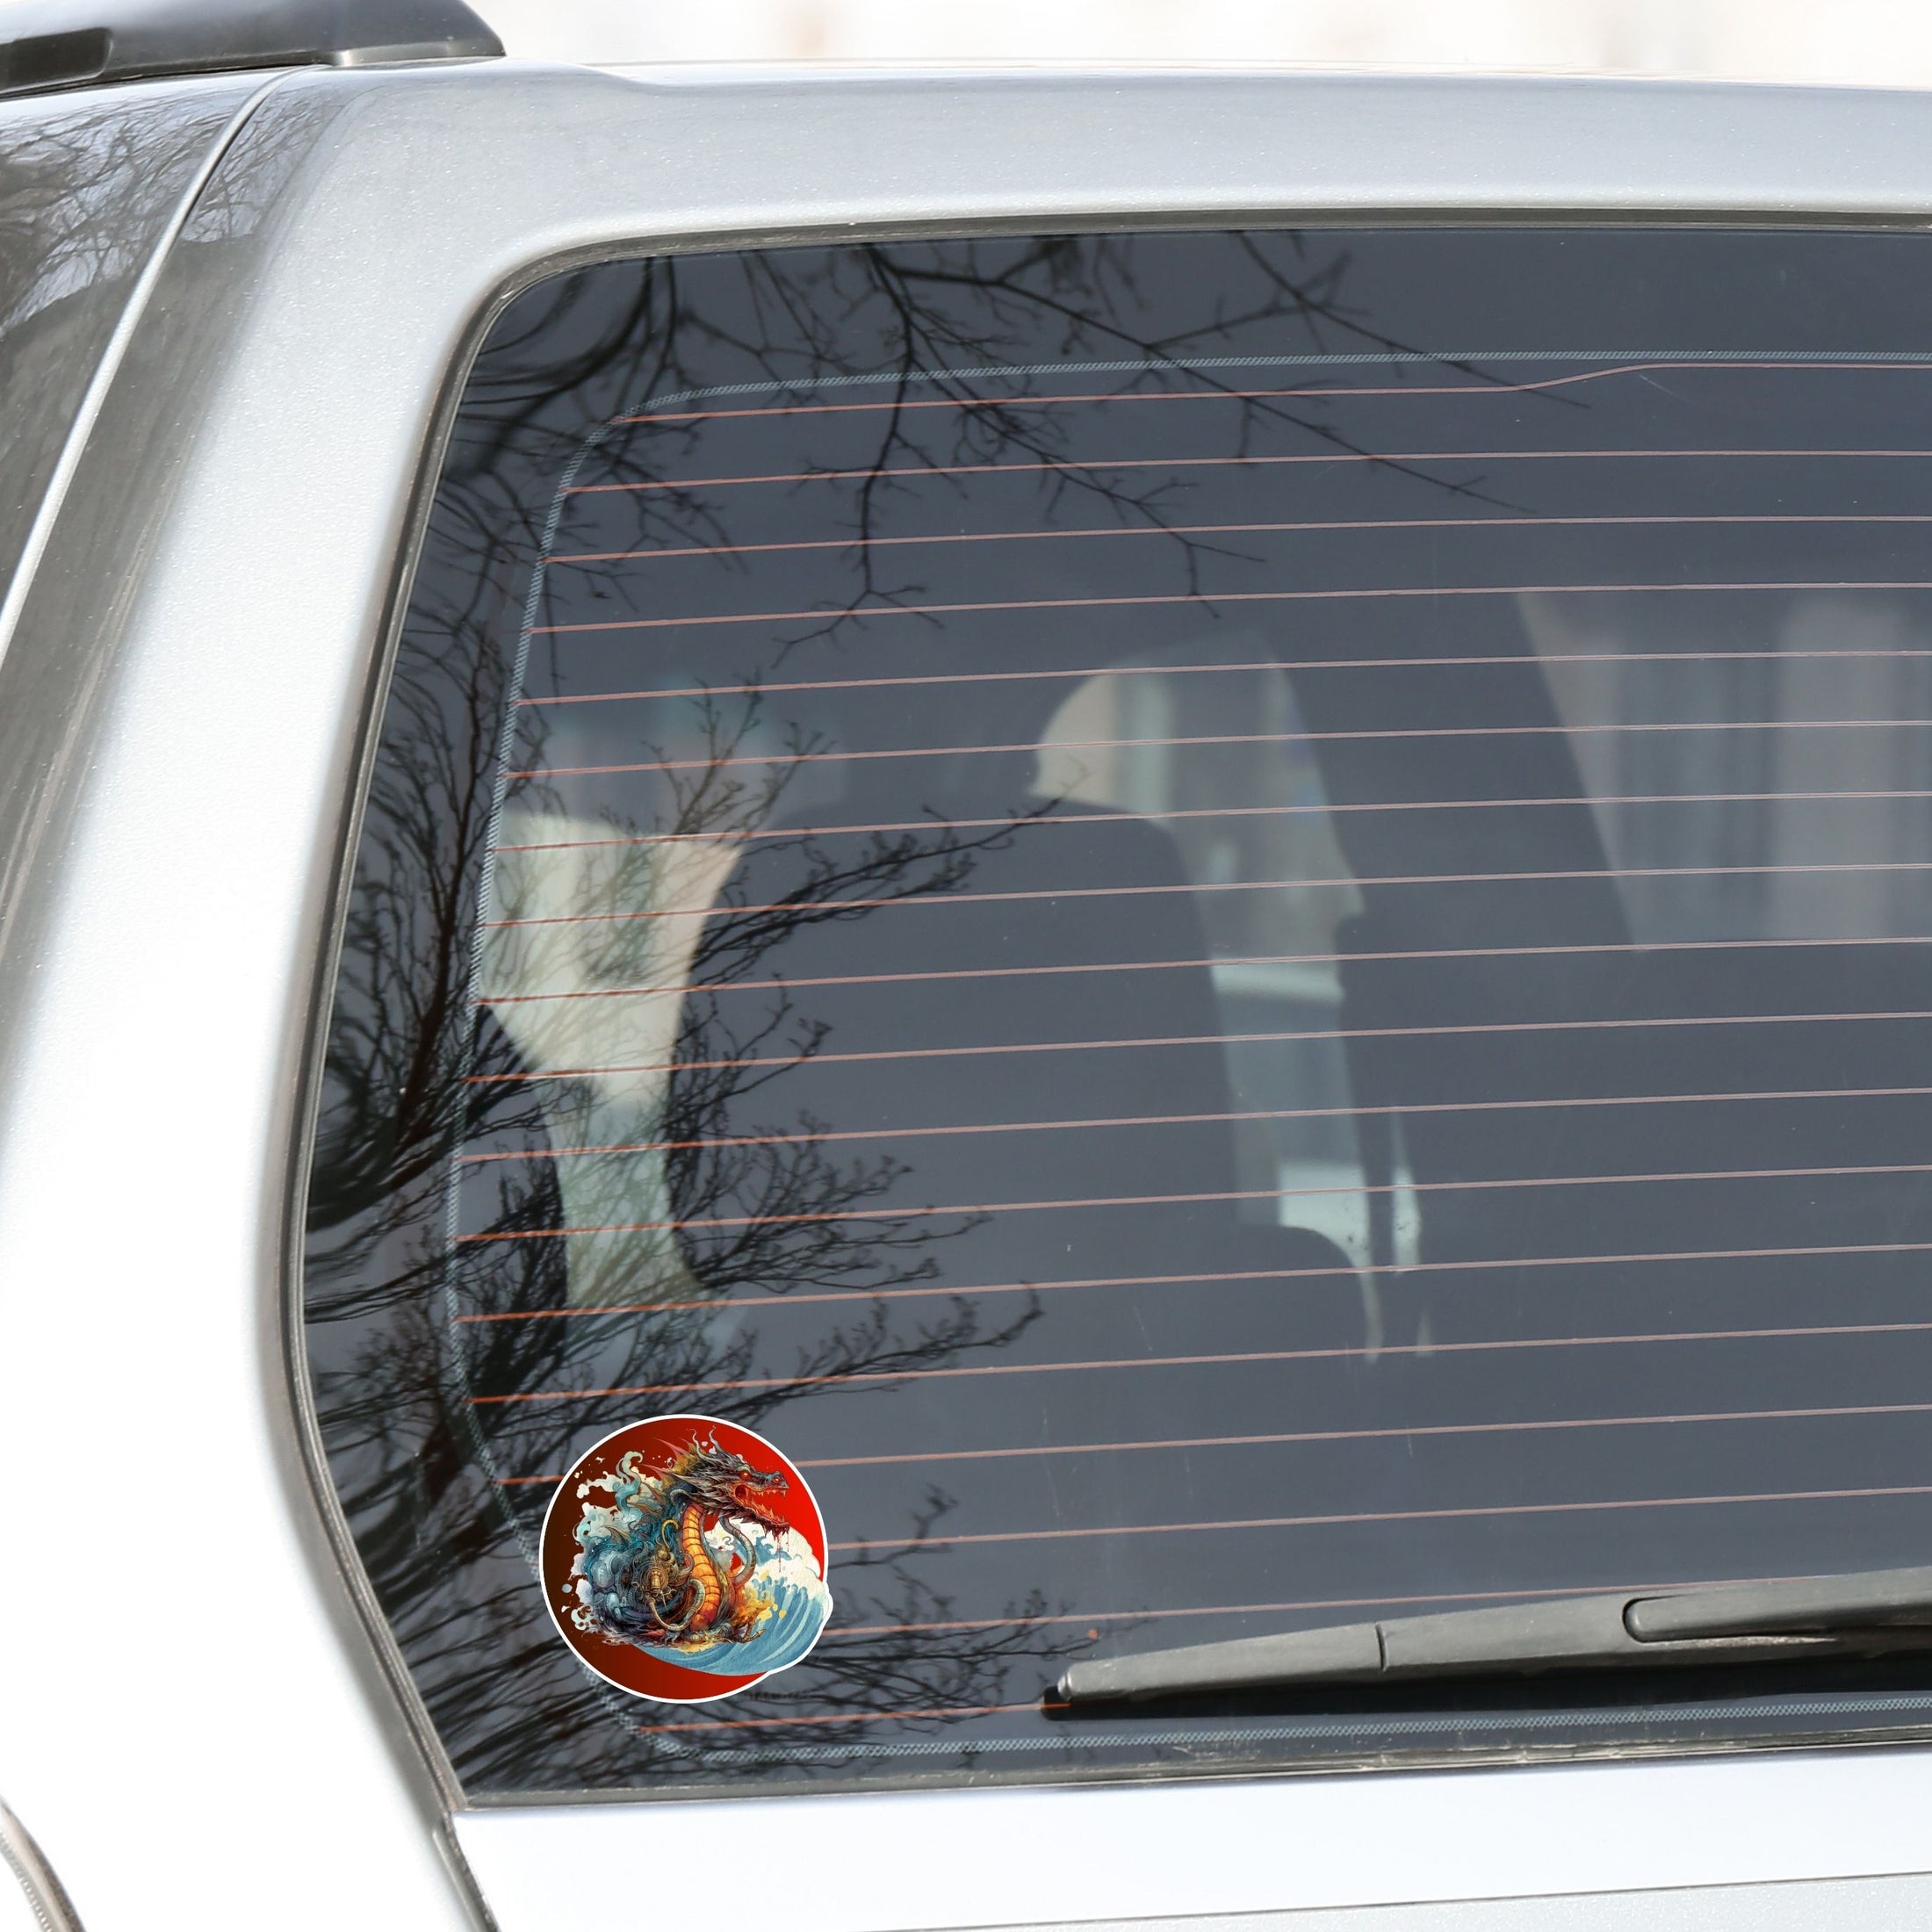 This image shows the steampunk Japanese dragon sticker on the back window of a car.